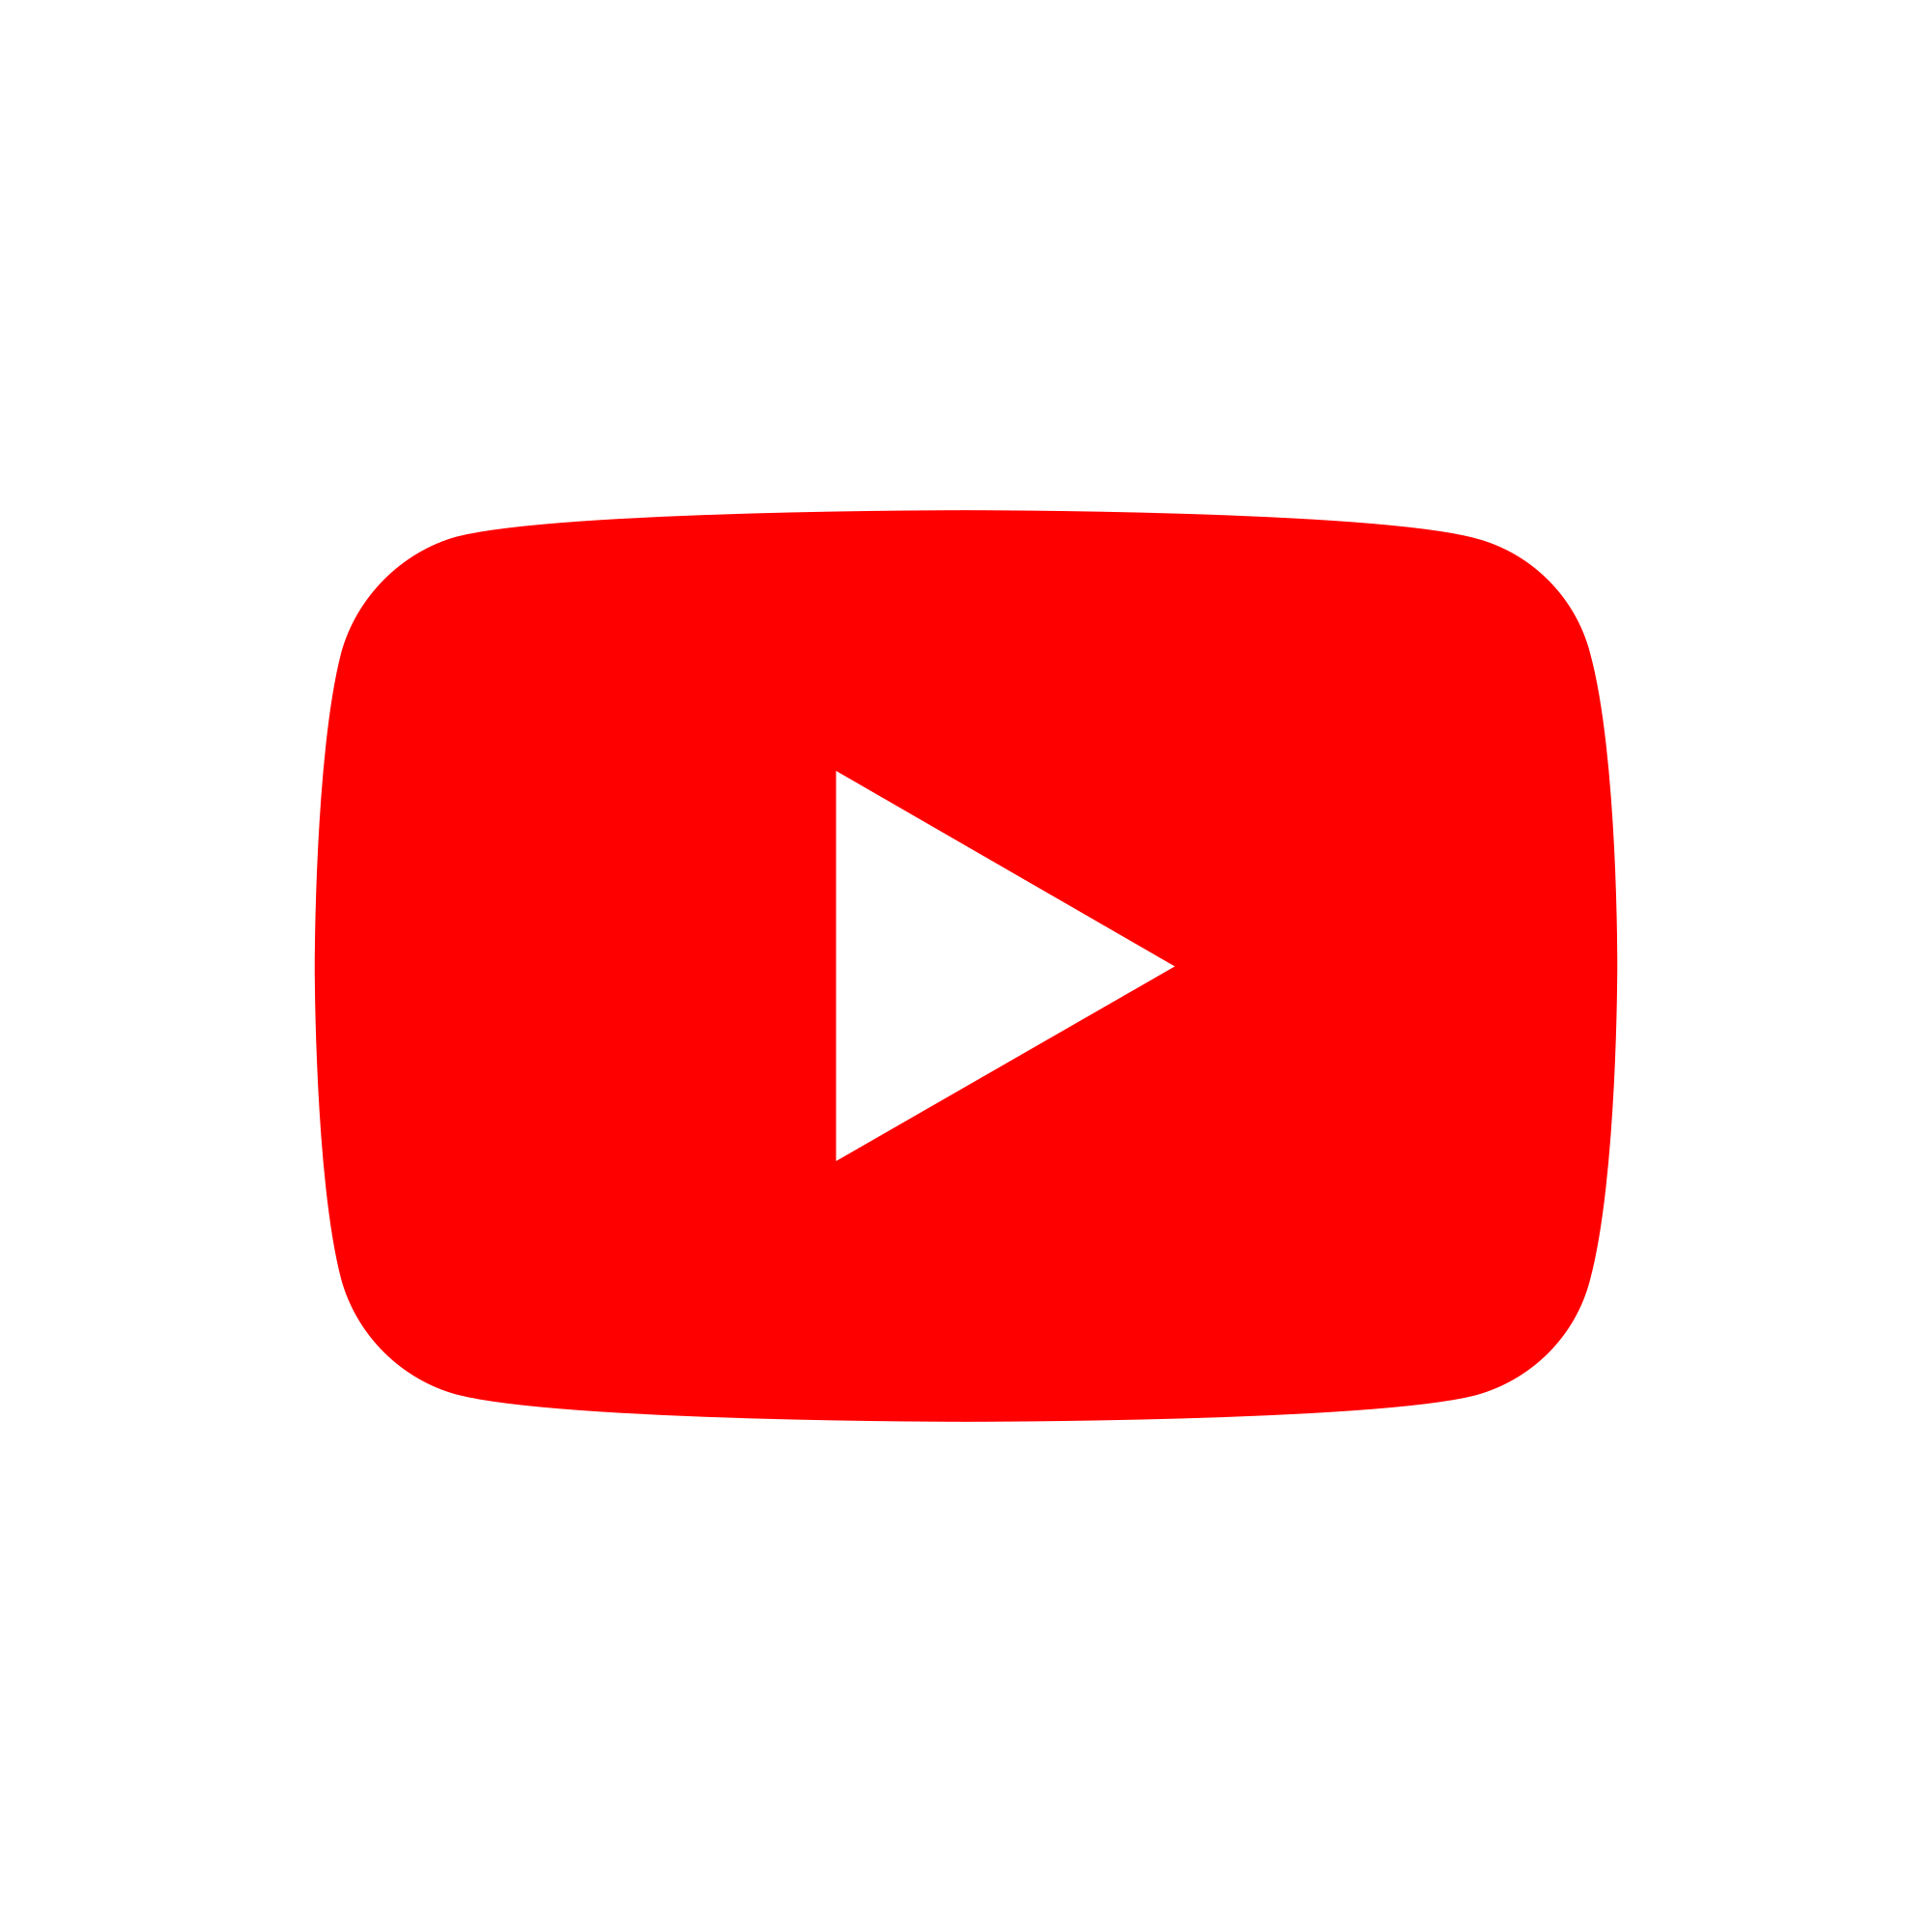 A picture of the youtube logo